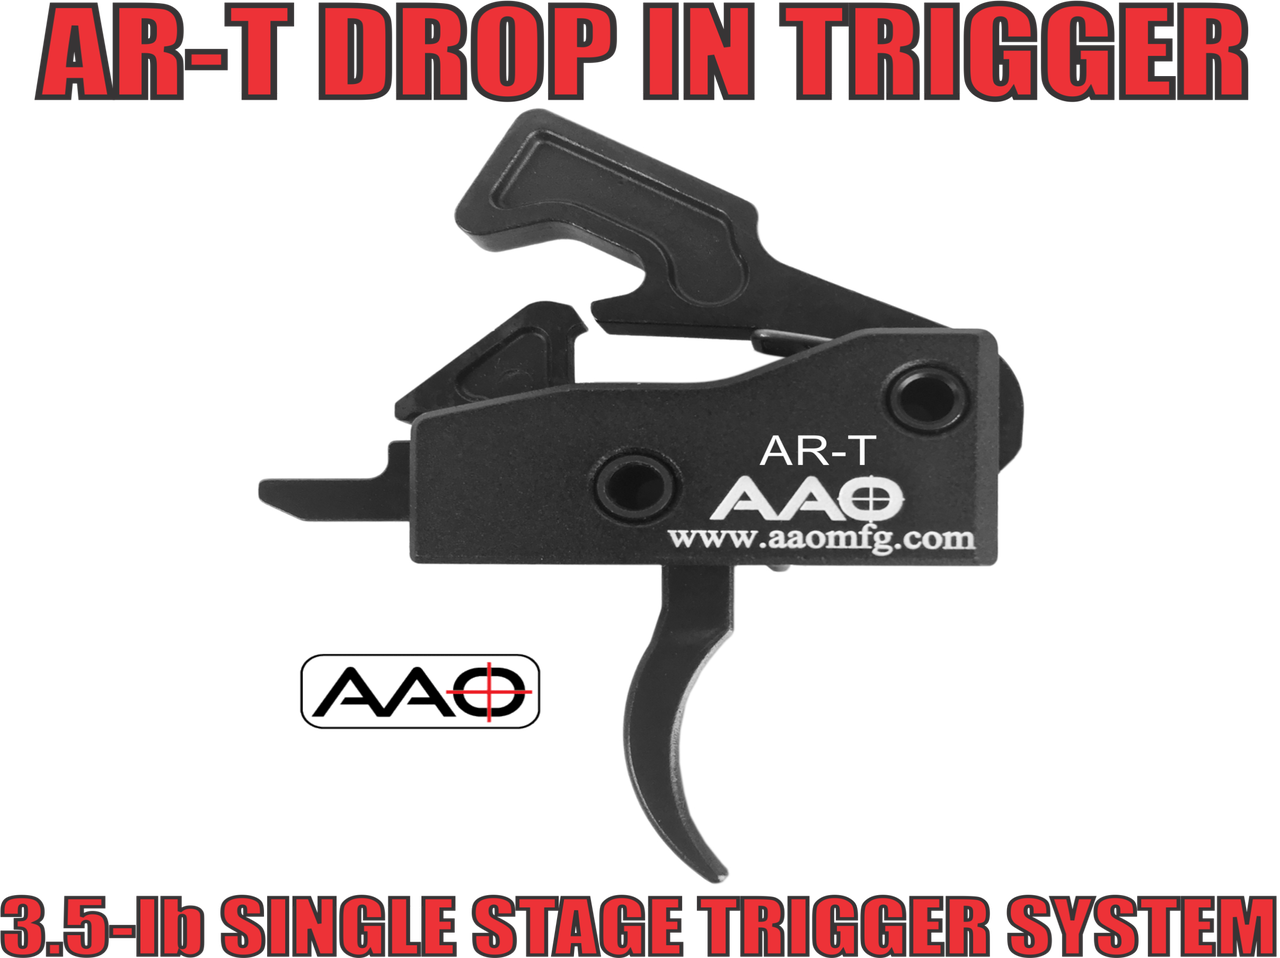 Drop in single stage trigger system

Curved trigger design for comfort

3.5lb pull weight 

Clean break at 3.5 lb

Fast/Short reset

Uses standard .154 trigger pins

Fits most Ar15 and Ar10 platforms

CNC aluminum case is hardcoat anodized

Metal parts are phosphate black for superior
corrosion resistance 

The design makes for an easy fast install
with no adjustments needed

Will work with standard milspec trigger pins 
thanks to allen head tension system (allen 
wrench included)